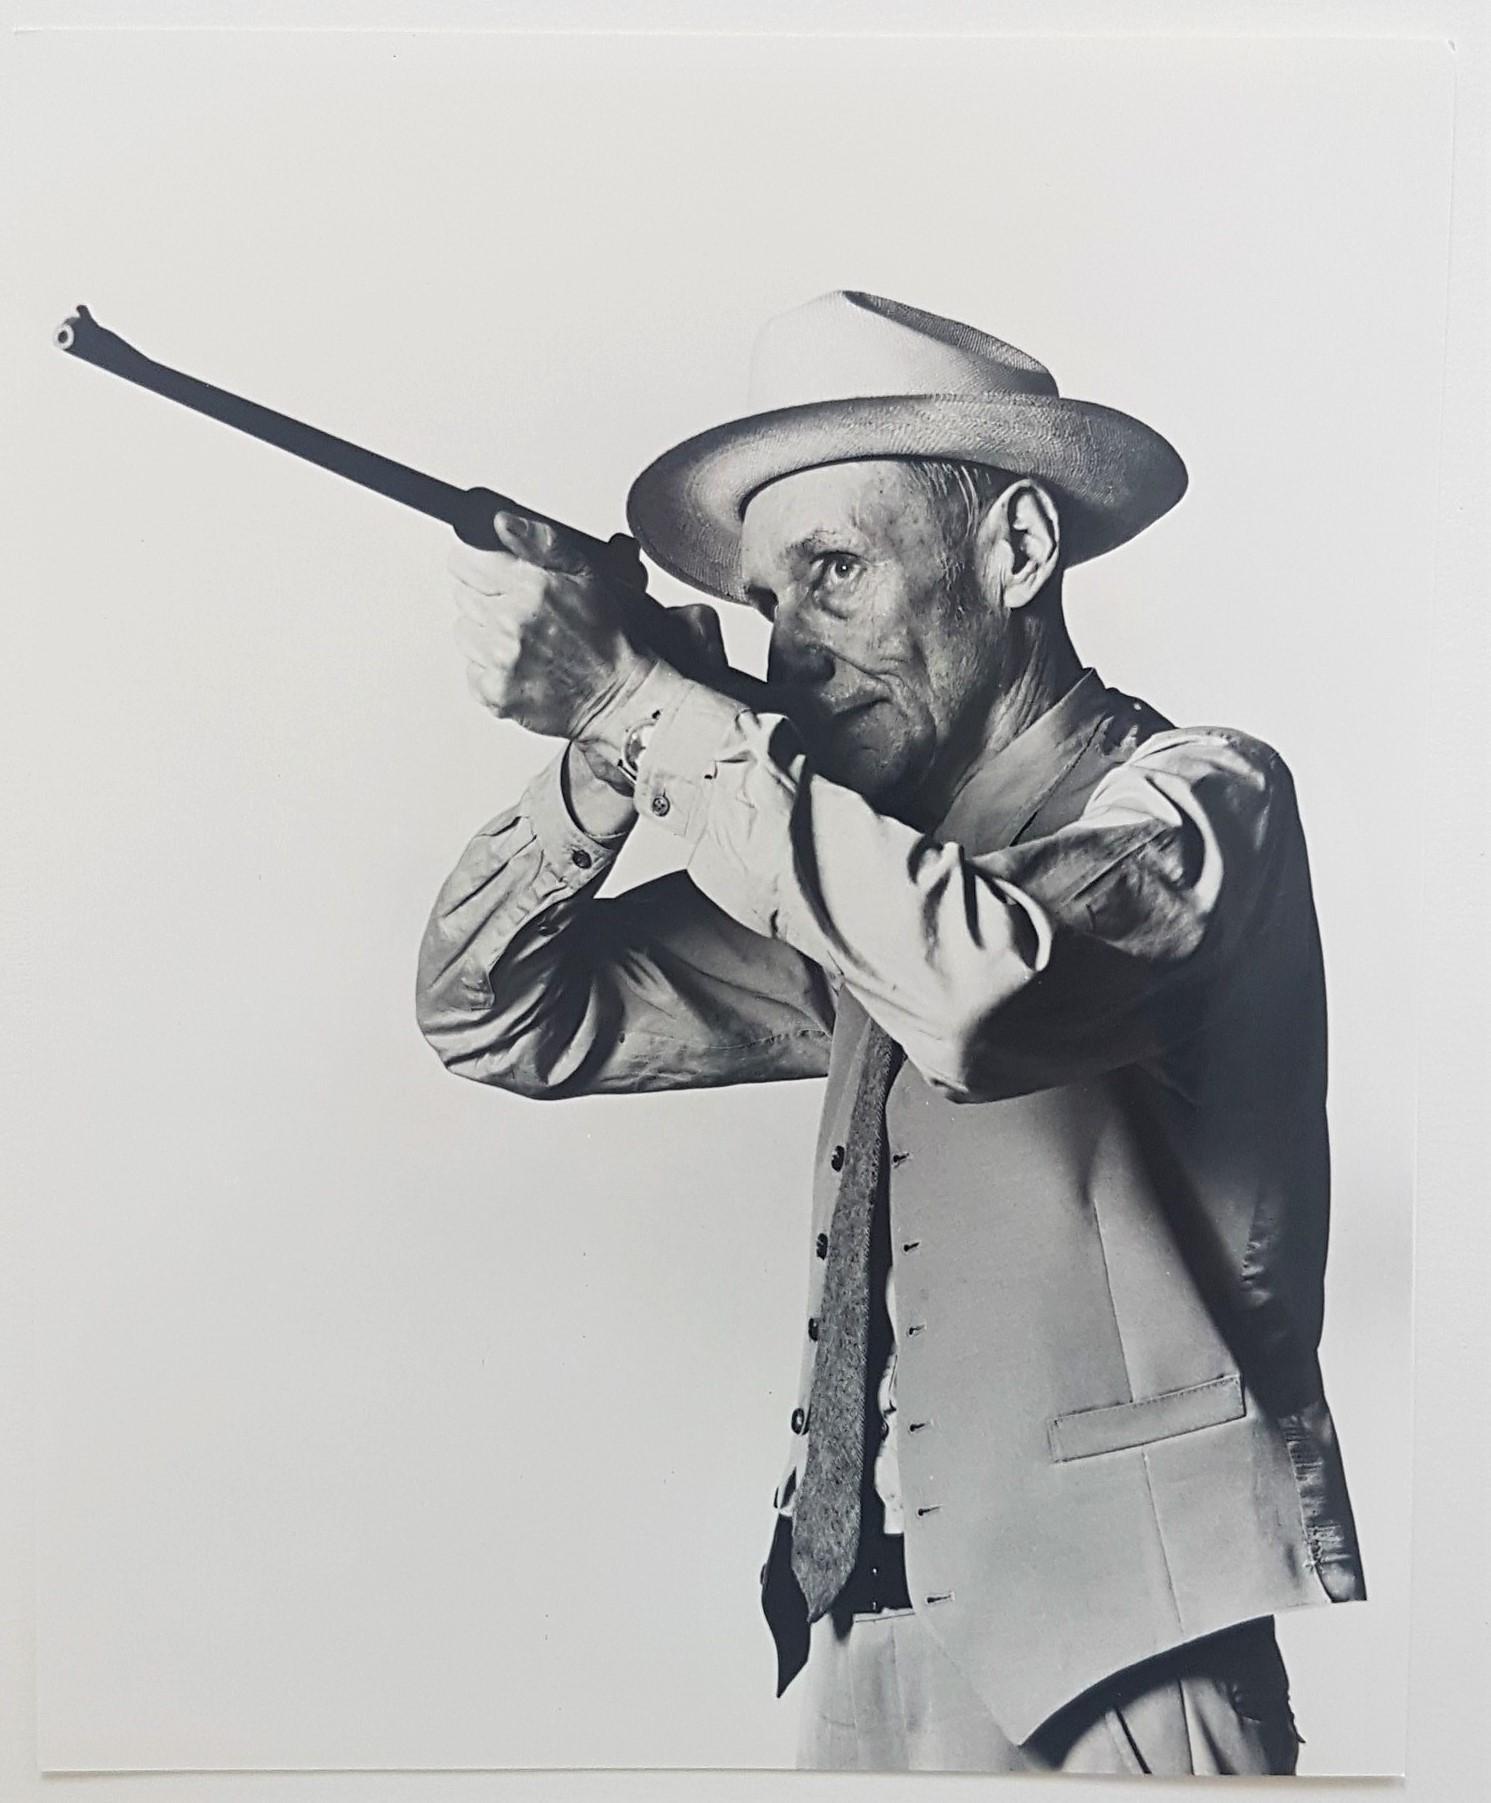 Robert Mapplethorpe Figurative Photograph - William S. Burroughs (Stamped) (~48% OFF LIST PRICE, LIMITED TIME)